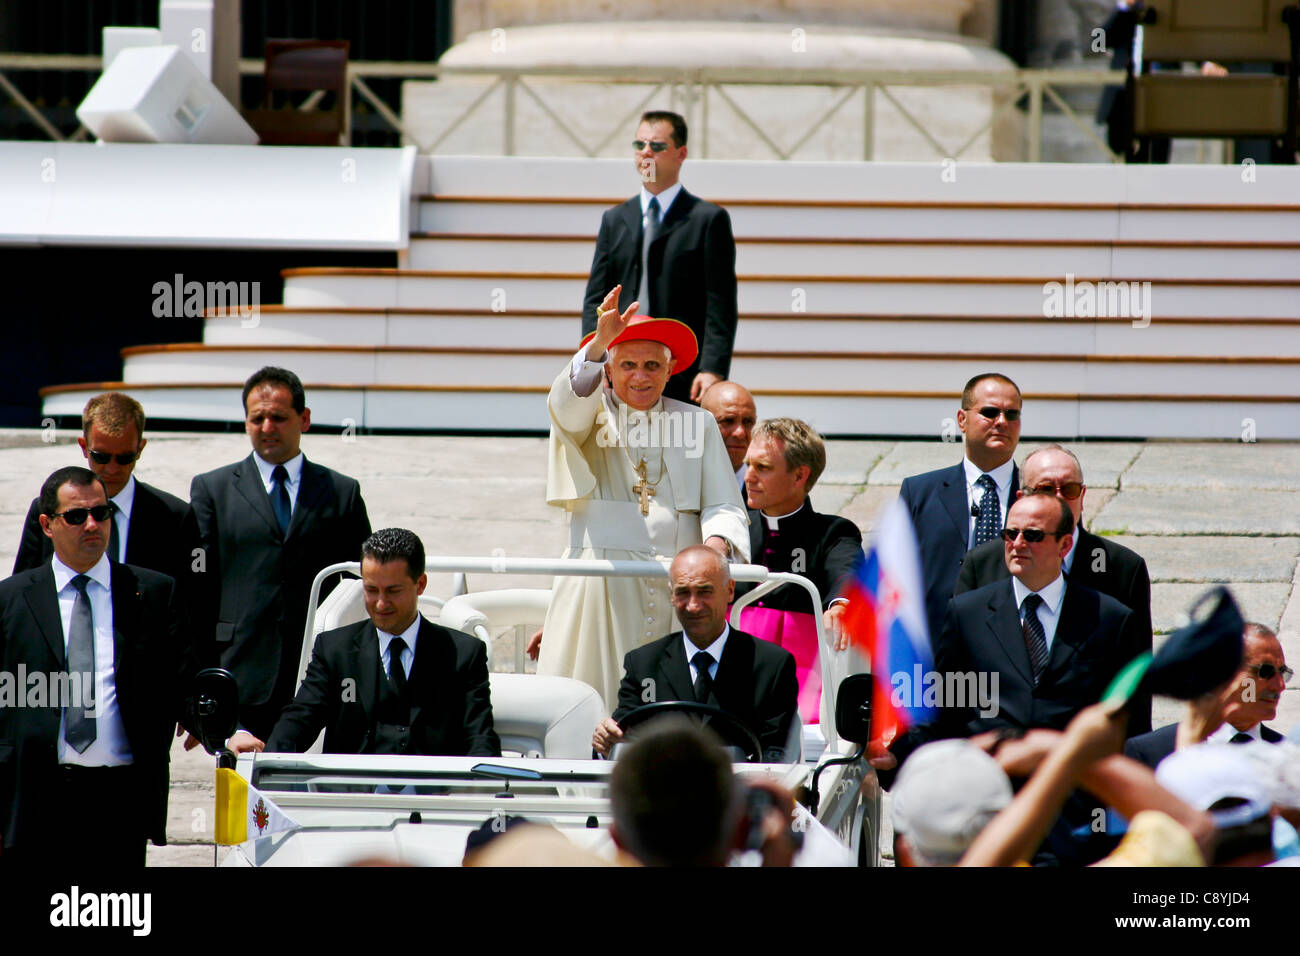 Pope Benedict XVI waves to the crowd after out door mass in Piazza San Pietro, Vatican, Rome, Italy Stock Photo